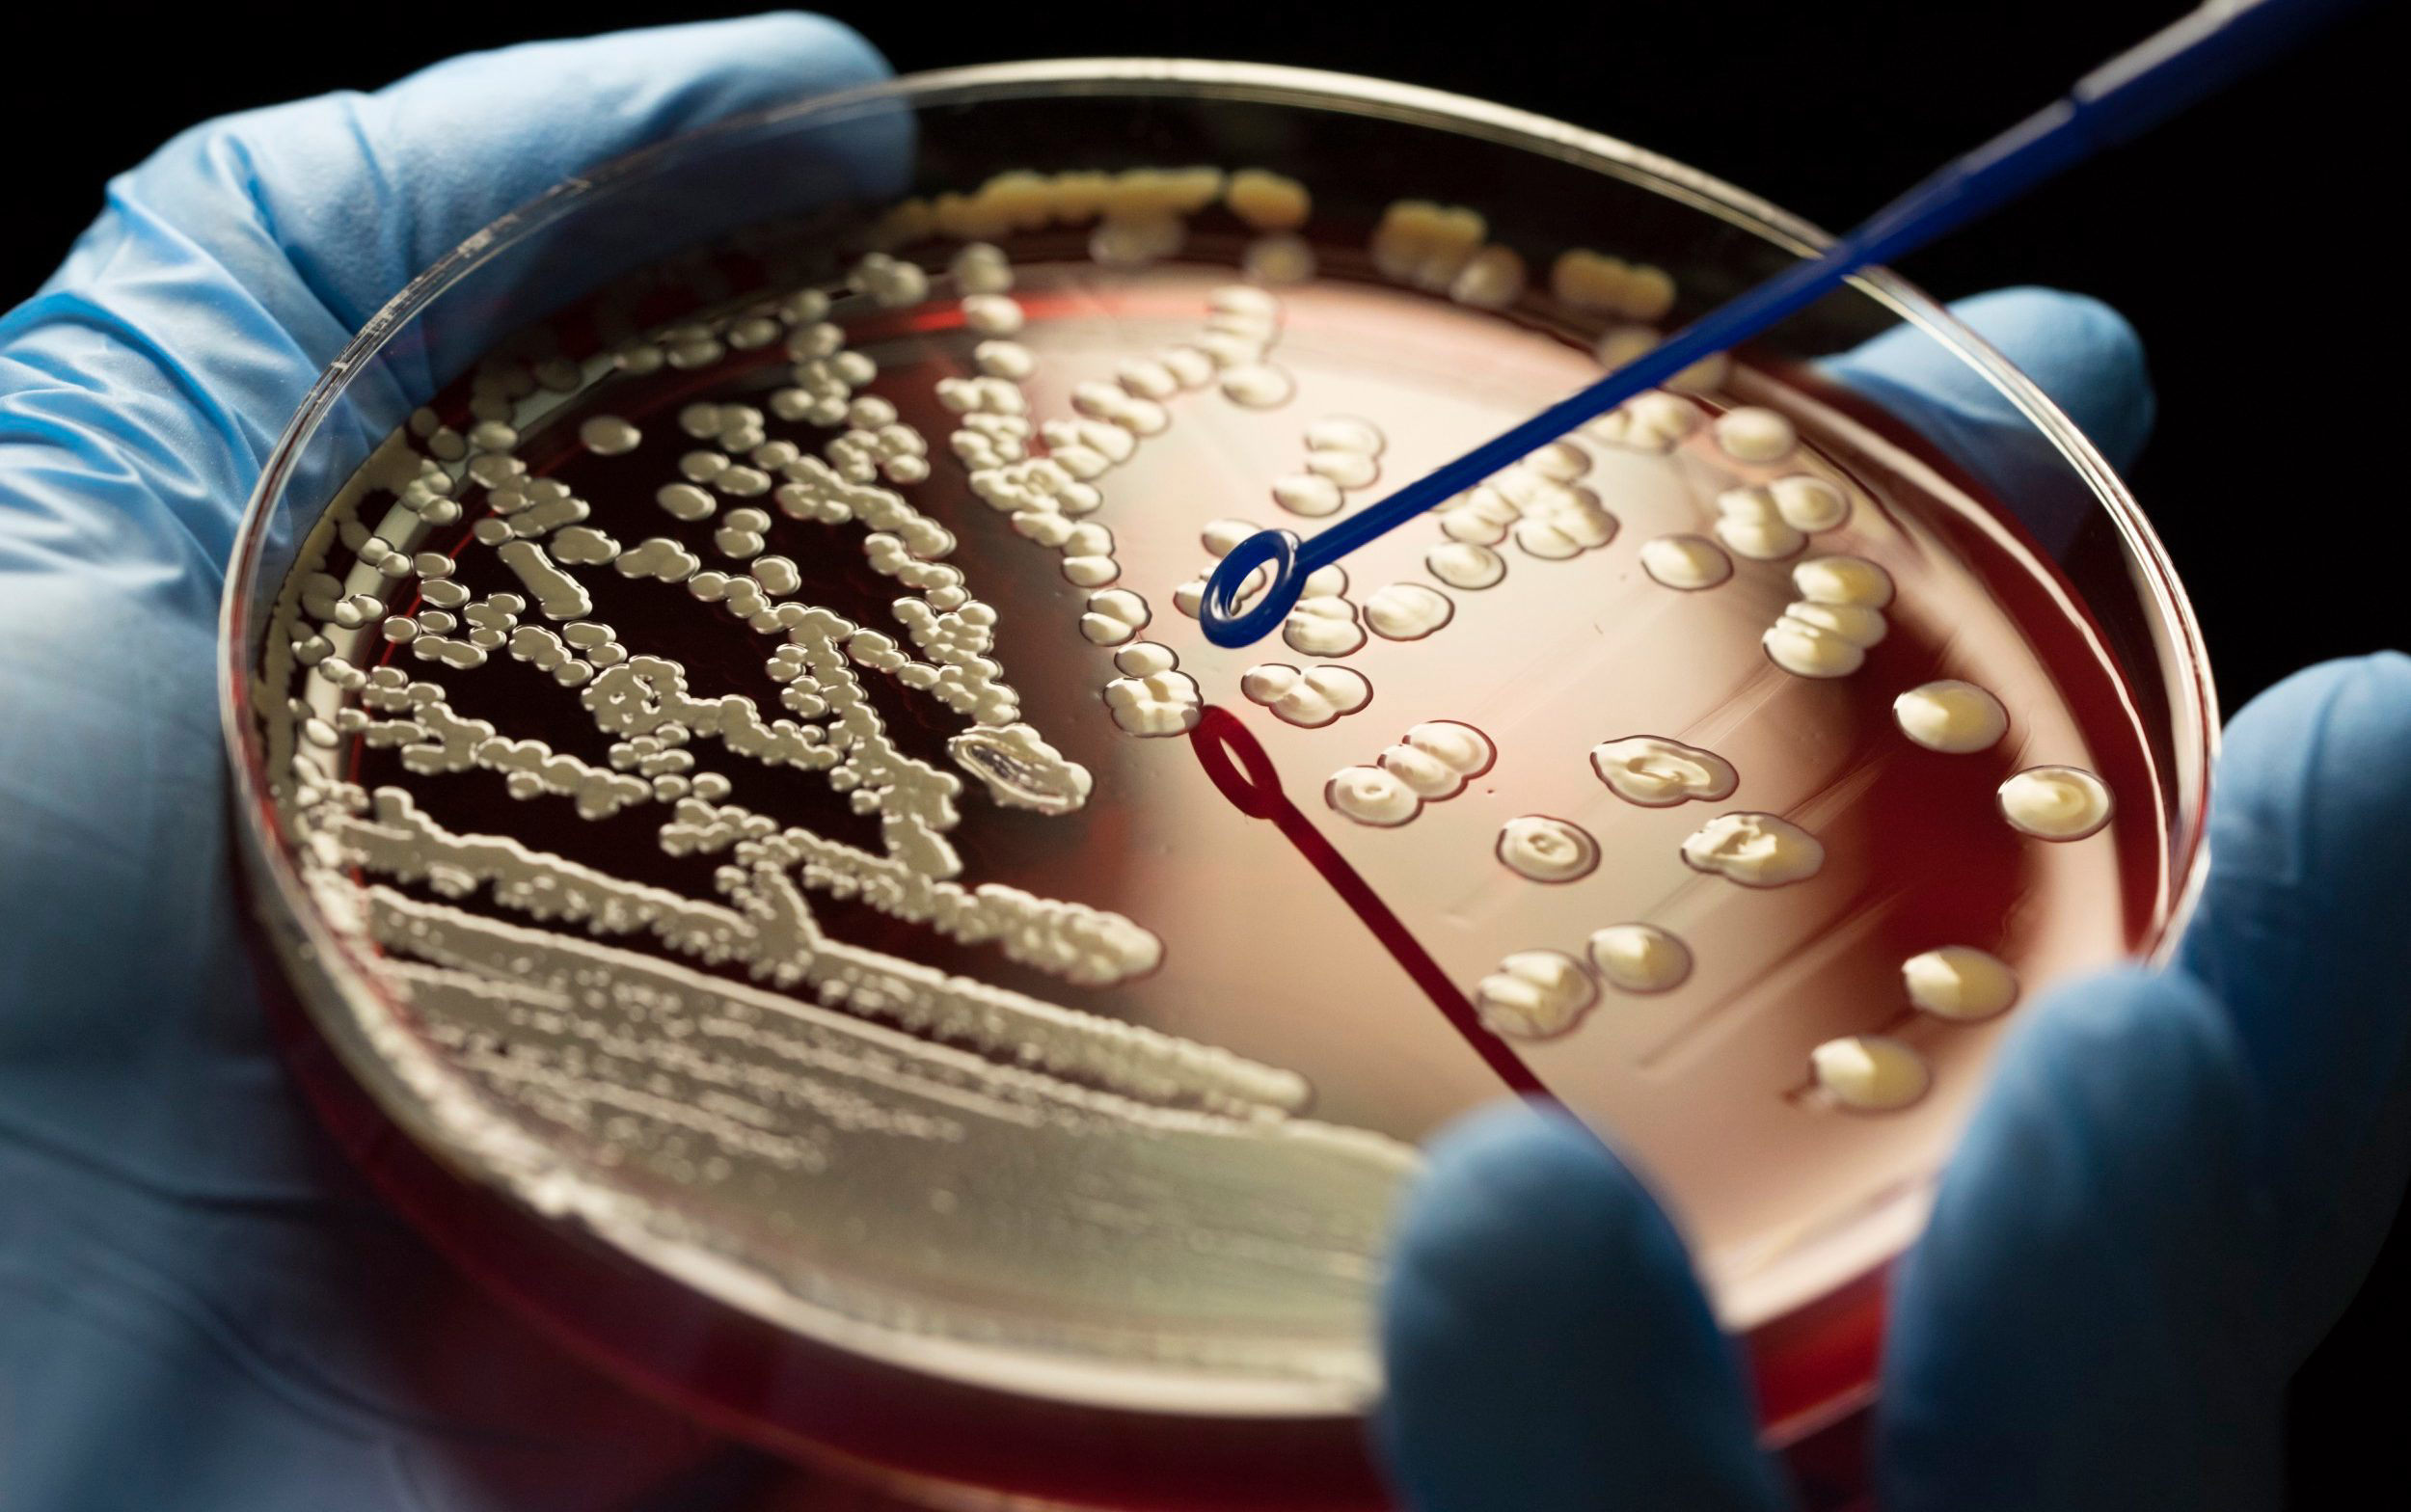 New antibiotic appears to kill bacteria that poses key threat to human ...